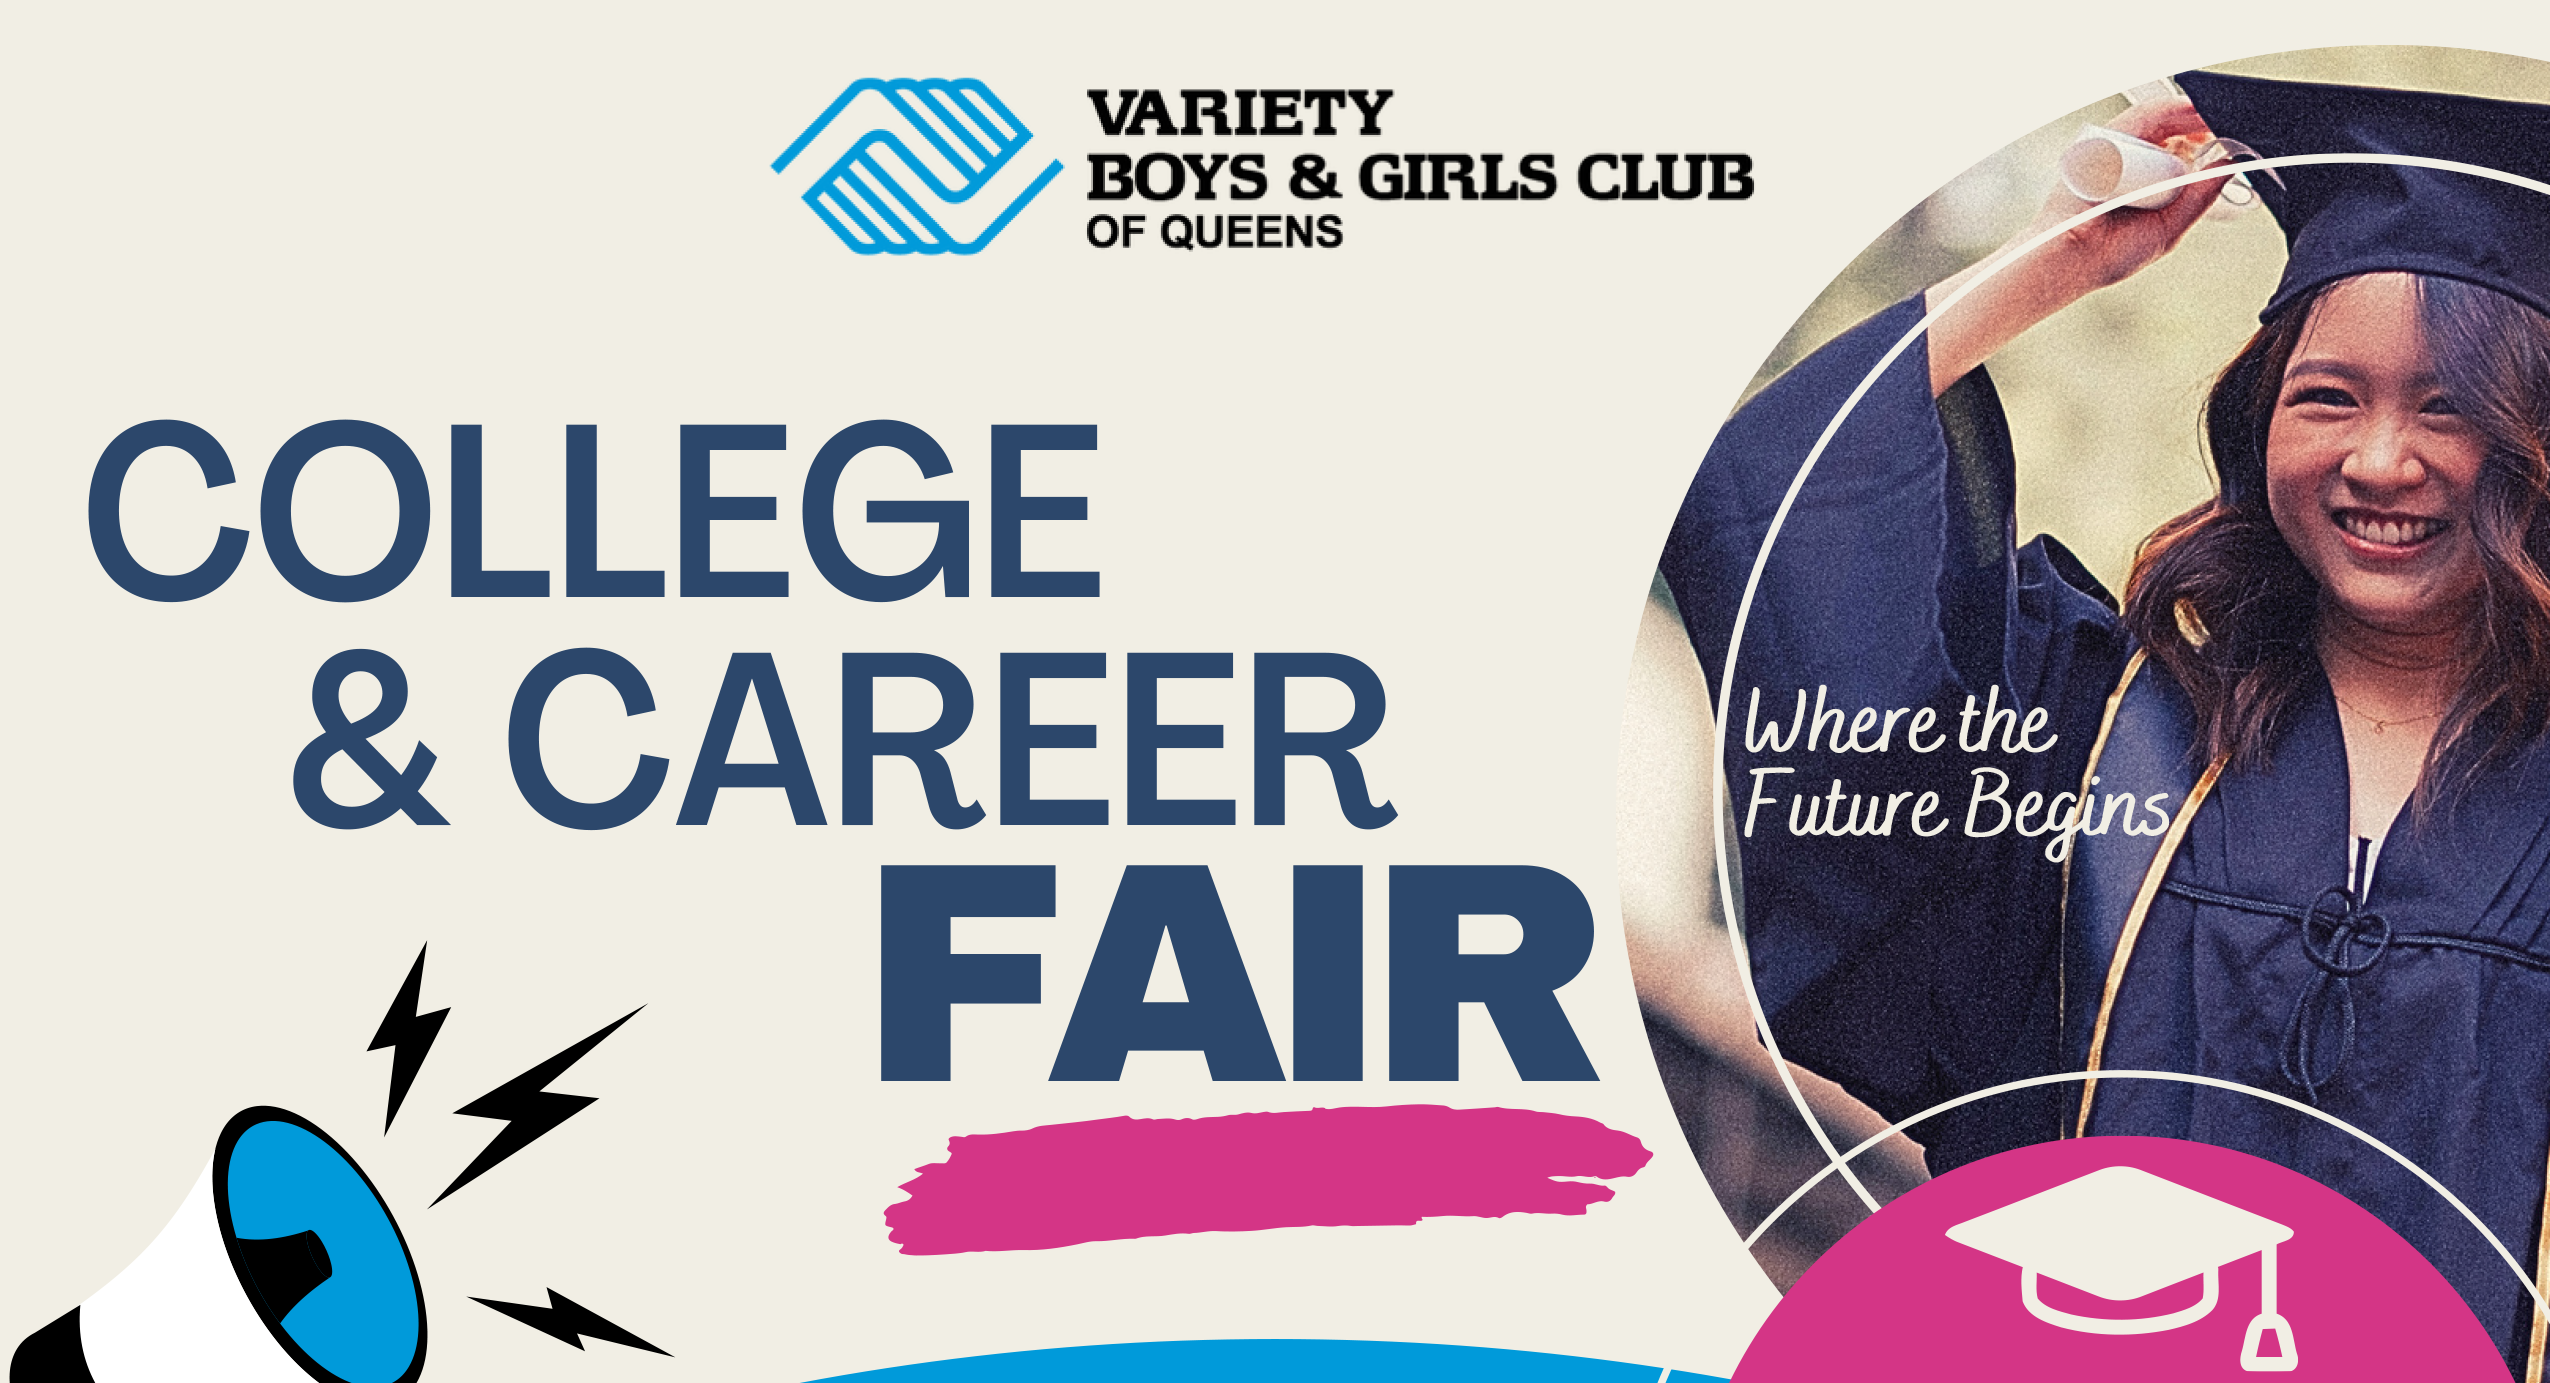 Variety Boys and Girls Club to host College and Career Fair in Astoria